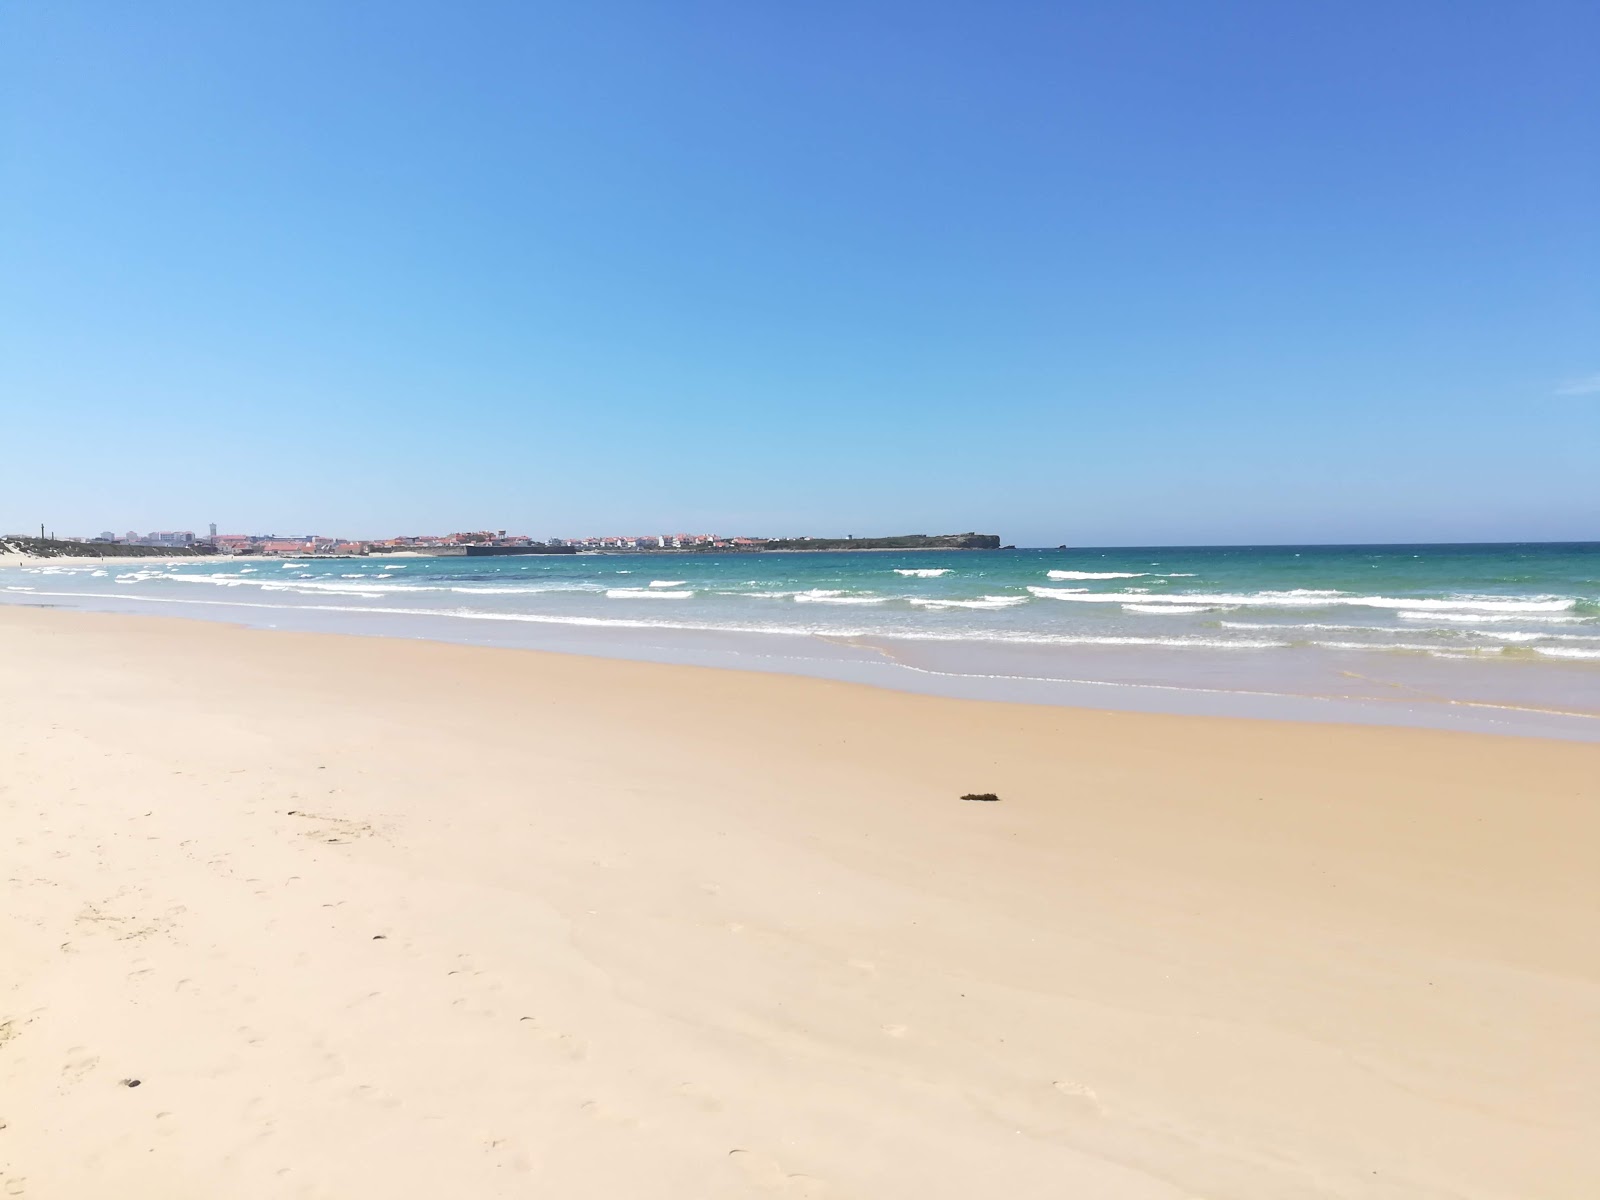 Photo of Praia Baleal - Sul with long straight shore